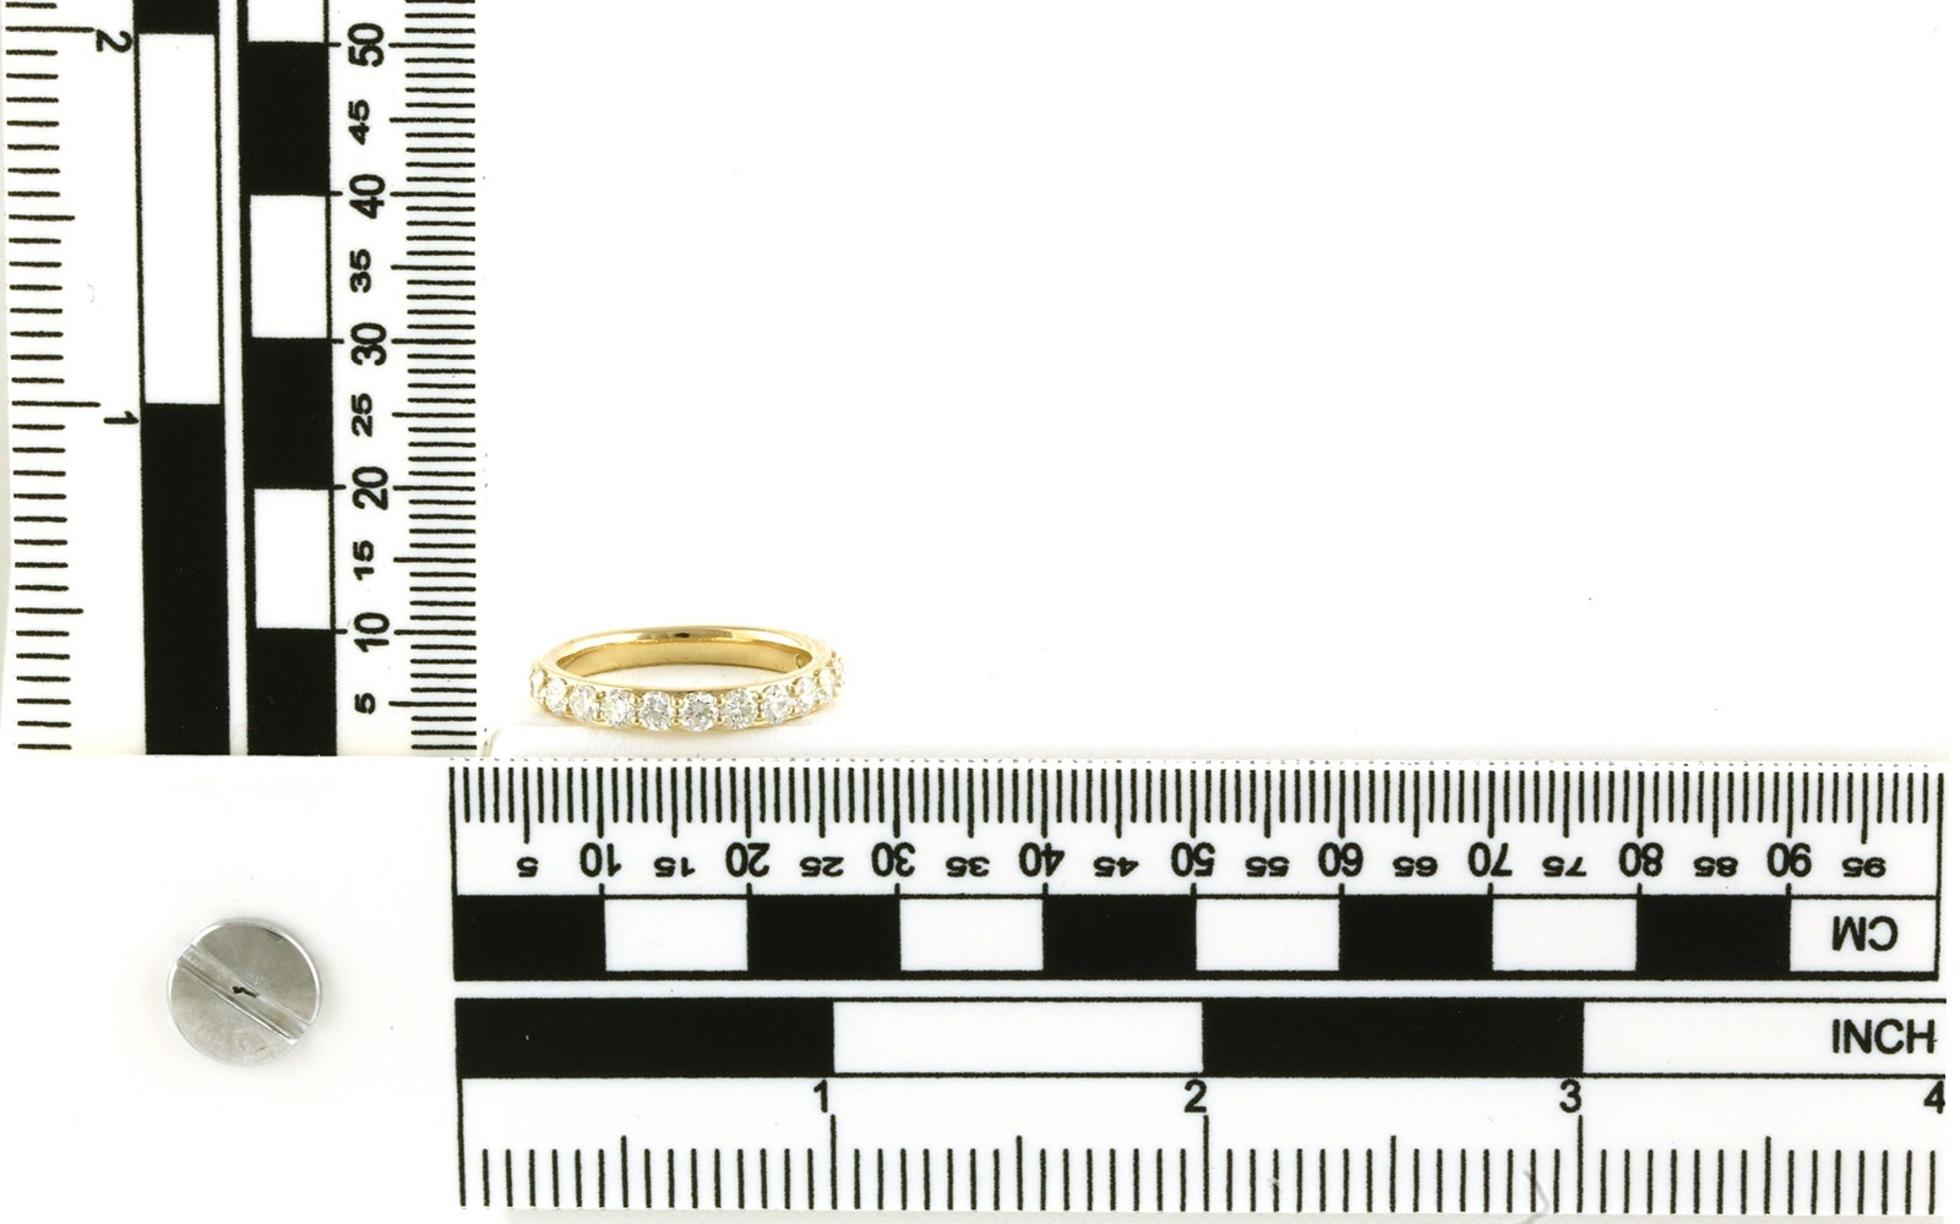 13-Stone Shared Prong Diamond Wedding Band in Yellow Gold (1.00cts TWT) scale